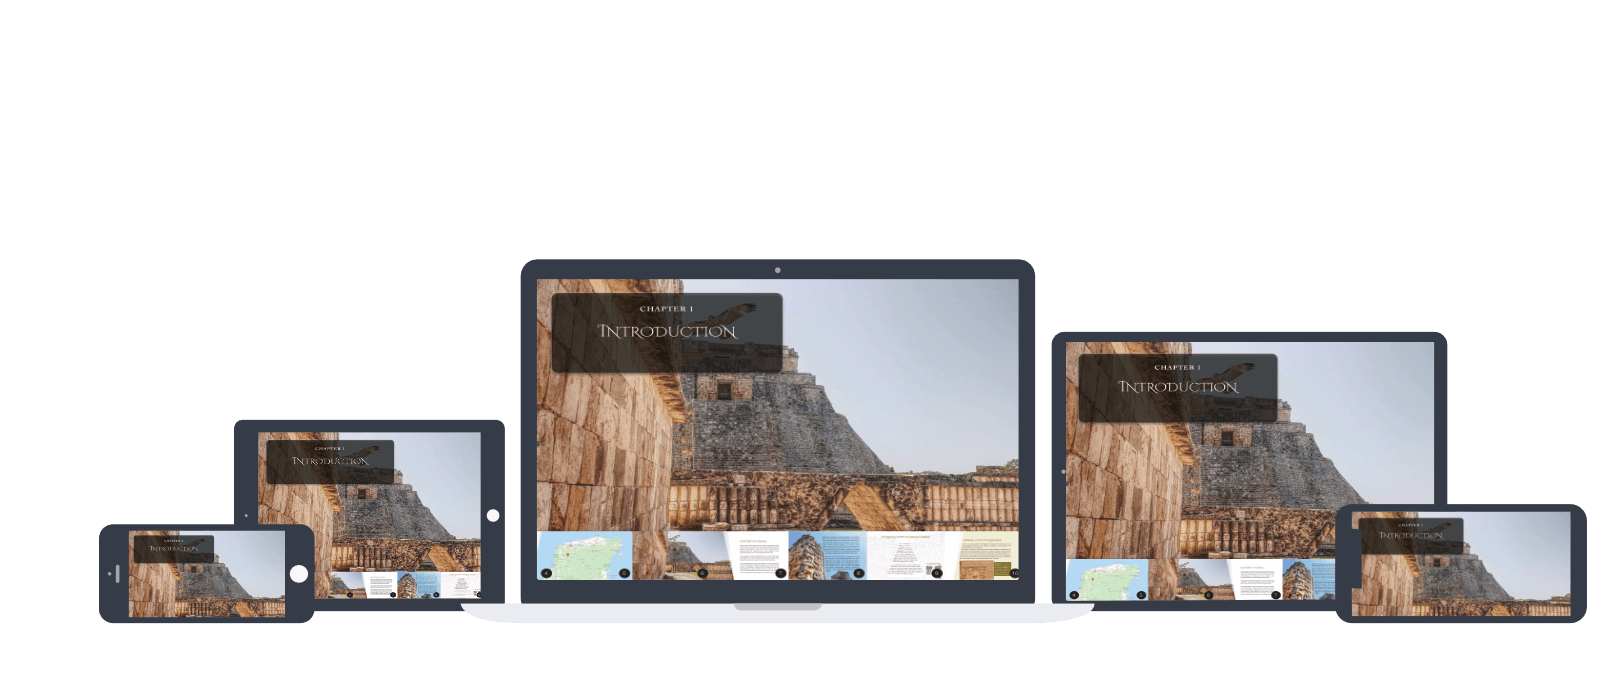 Uxmal Travel Guide on devices